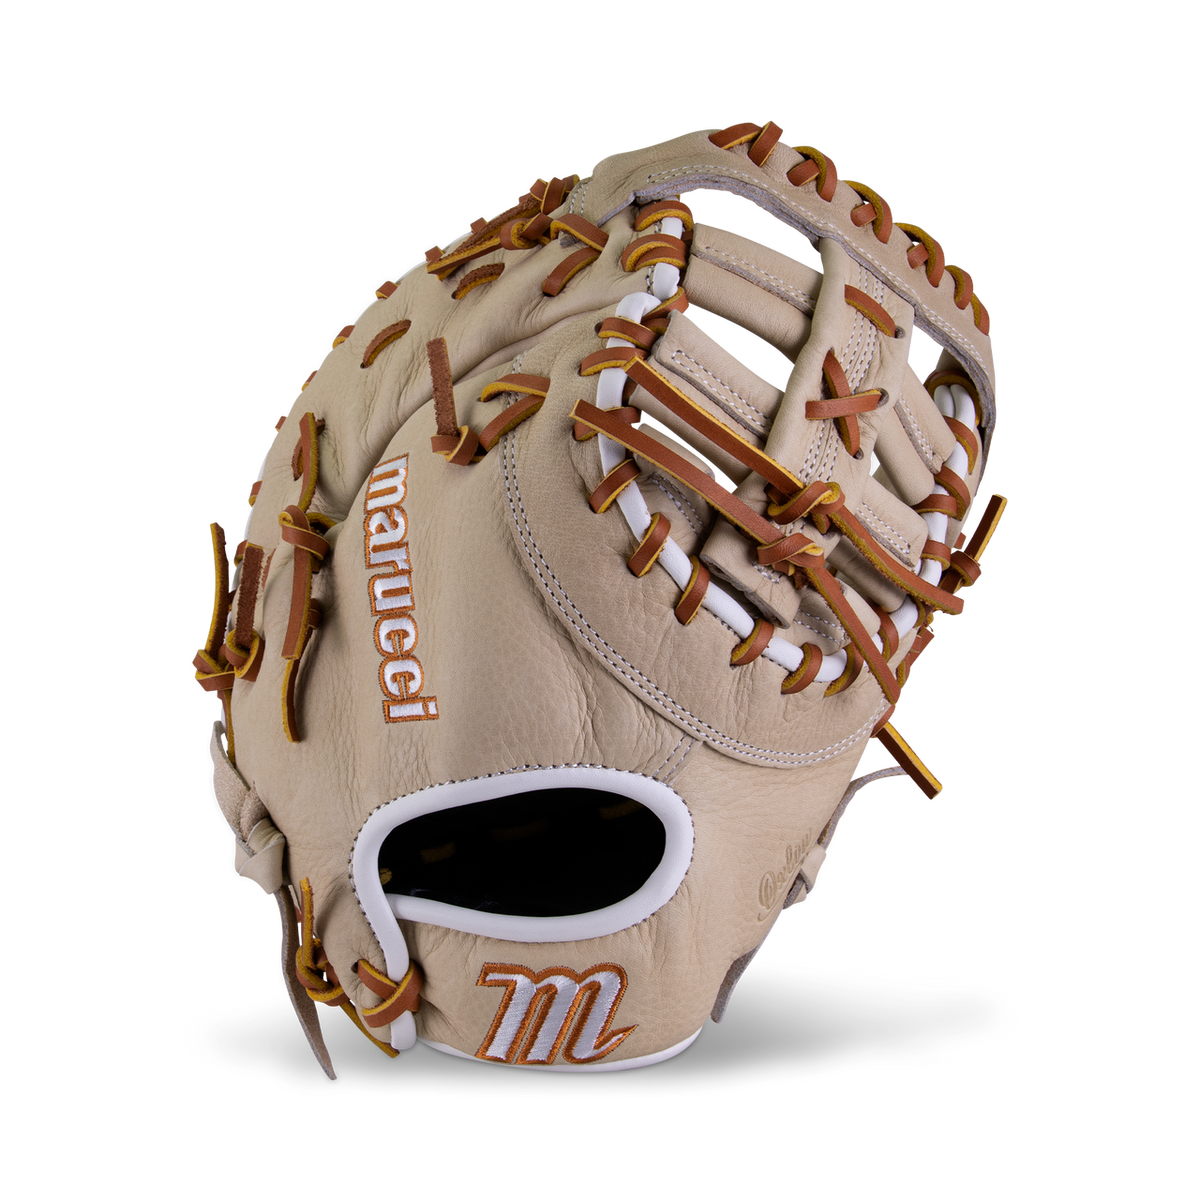 MARUCCI 1ST BASE GLOVE OXBOW M TYPE 38S1 12.75" DOUBLE POST WEB